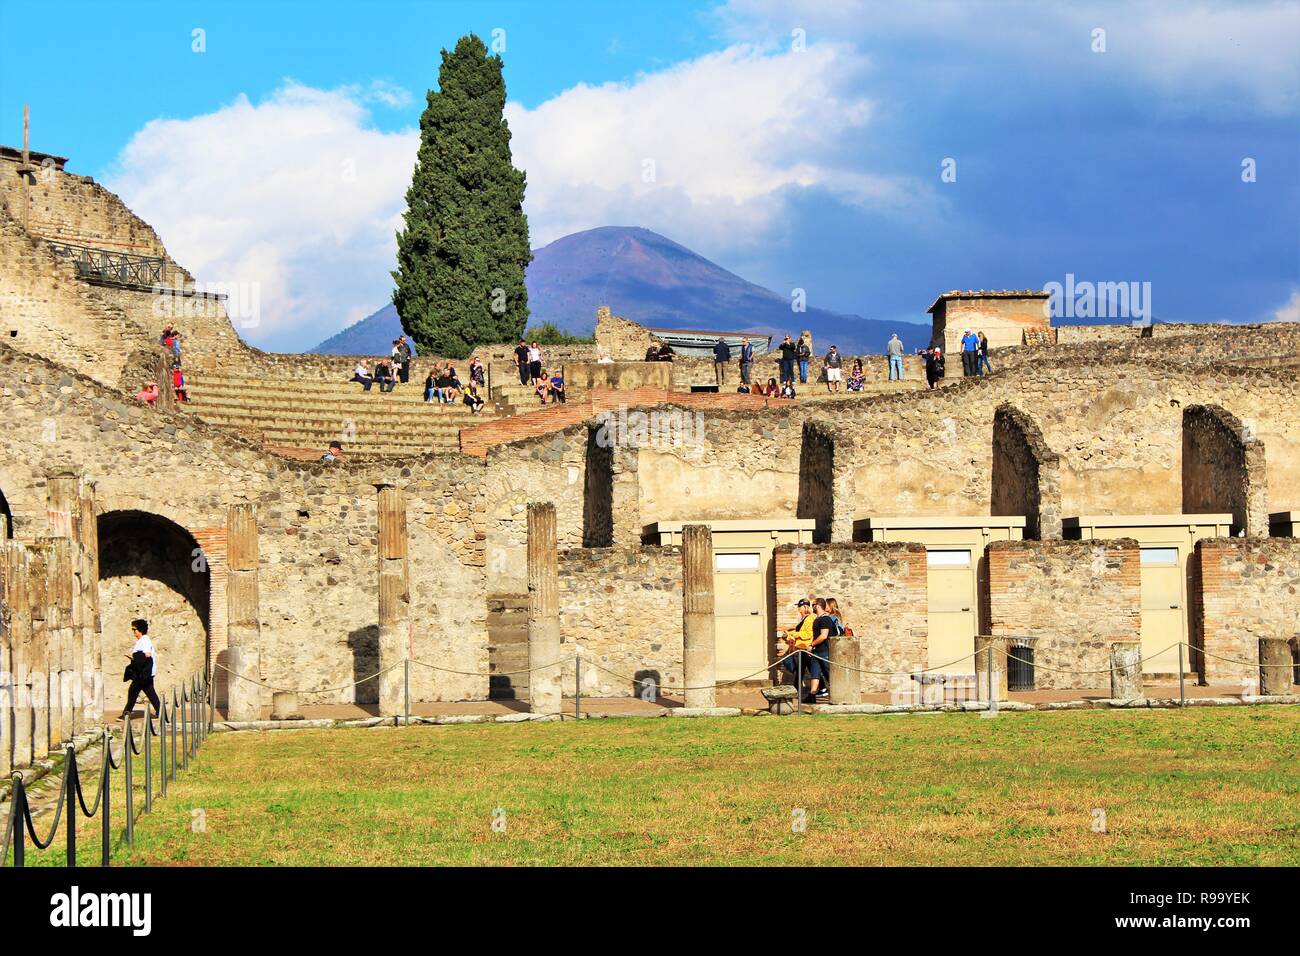 Pompeii, Italy - October 23rd 2018: Tourists explore the ruins of the amphitheater in the ancient city of Pompeii, with Mount Vesuvius in the distance Stock Photo